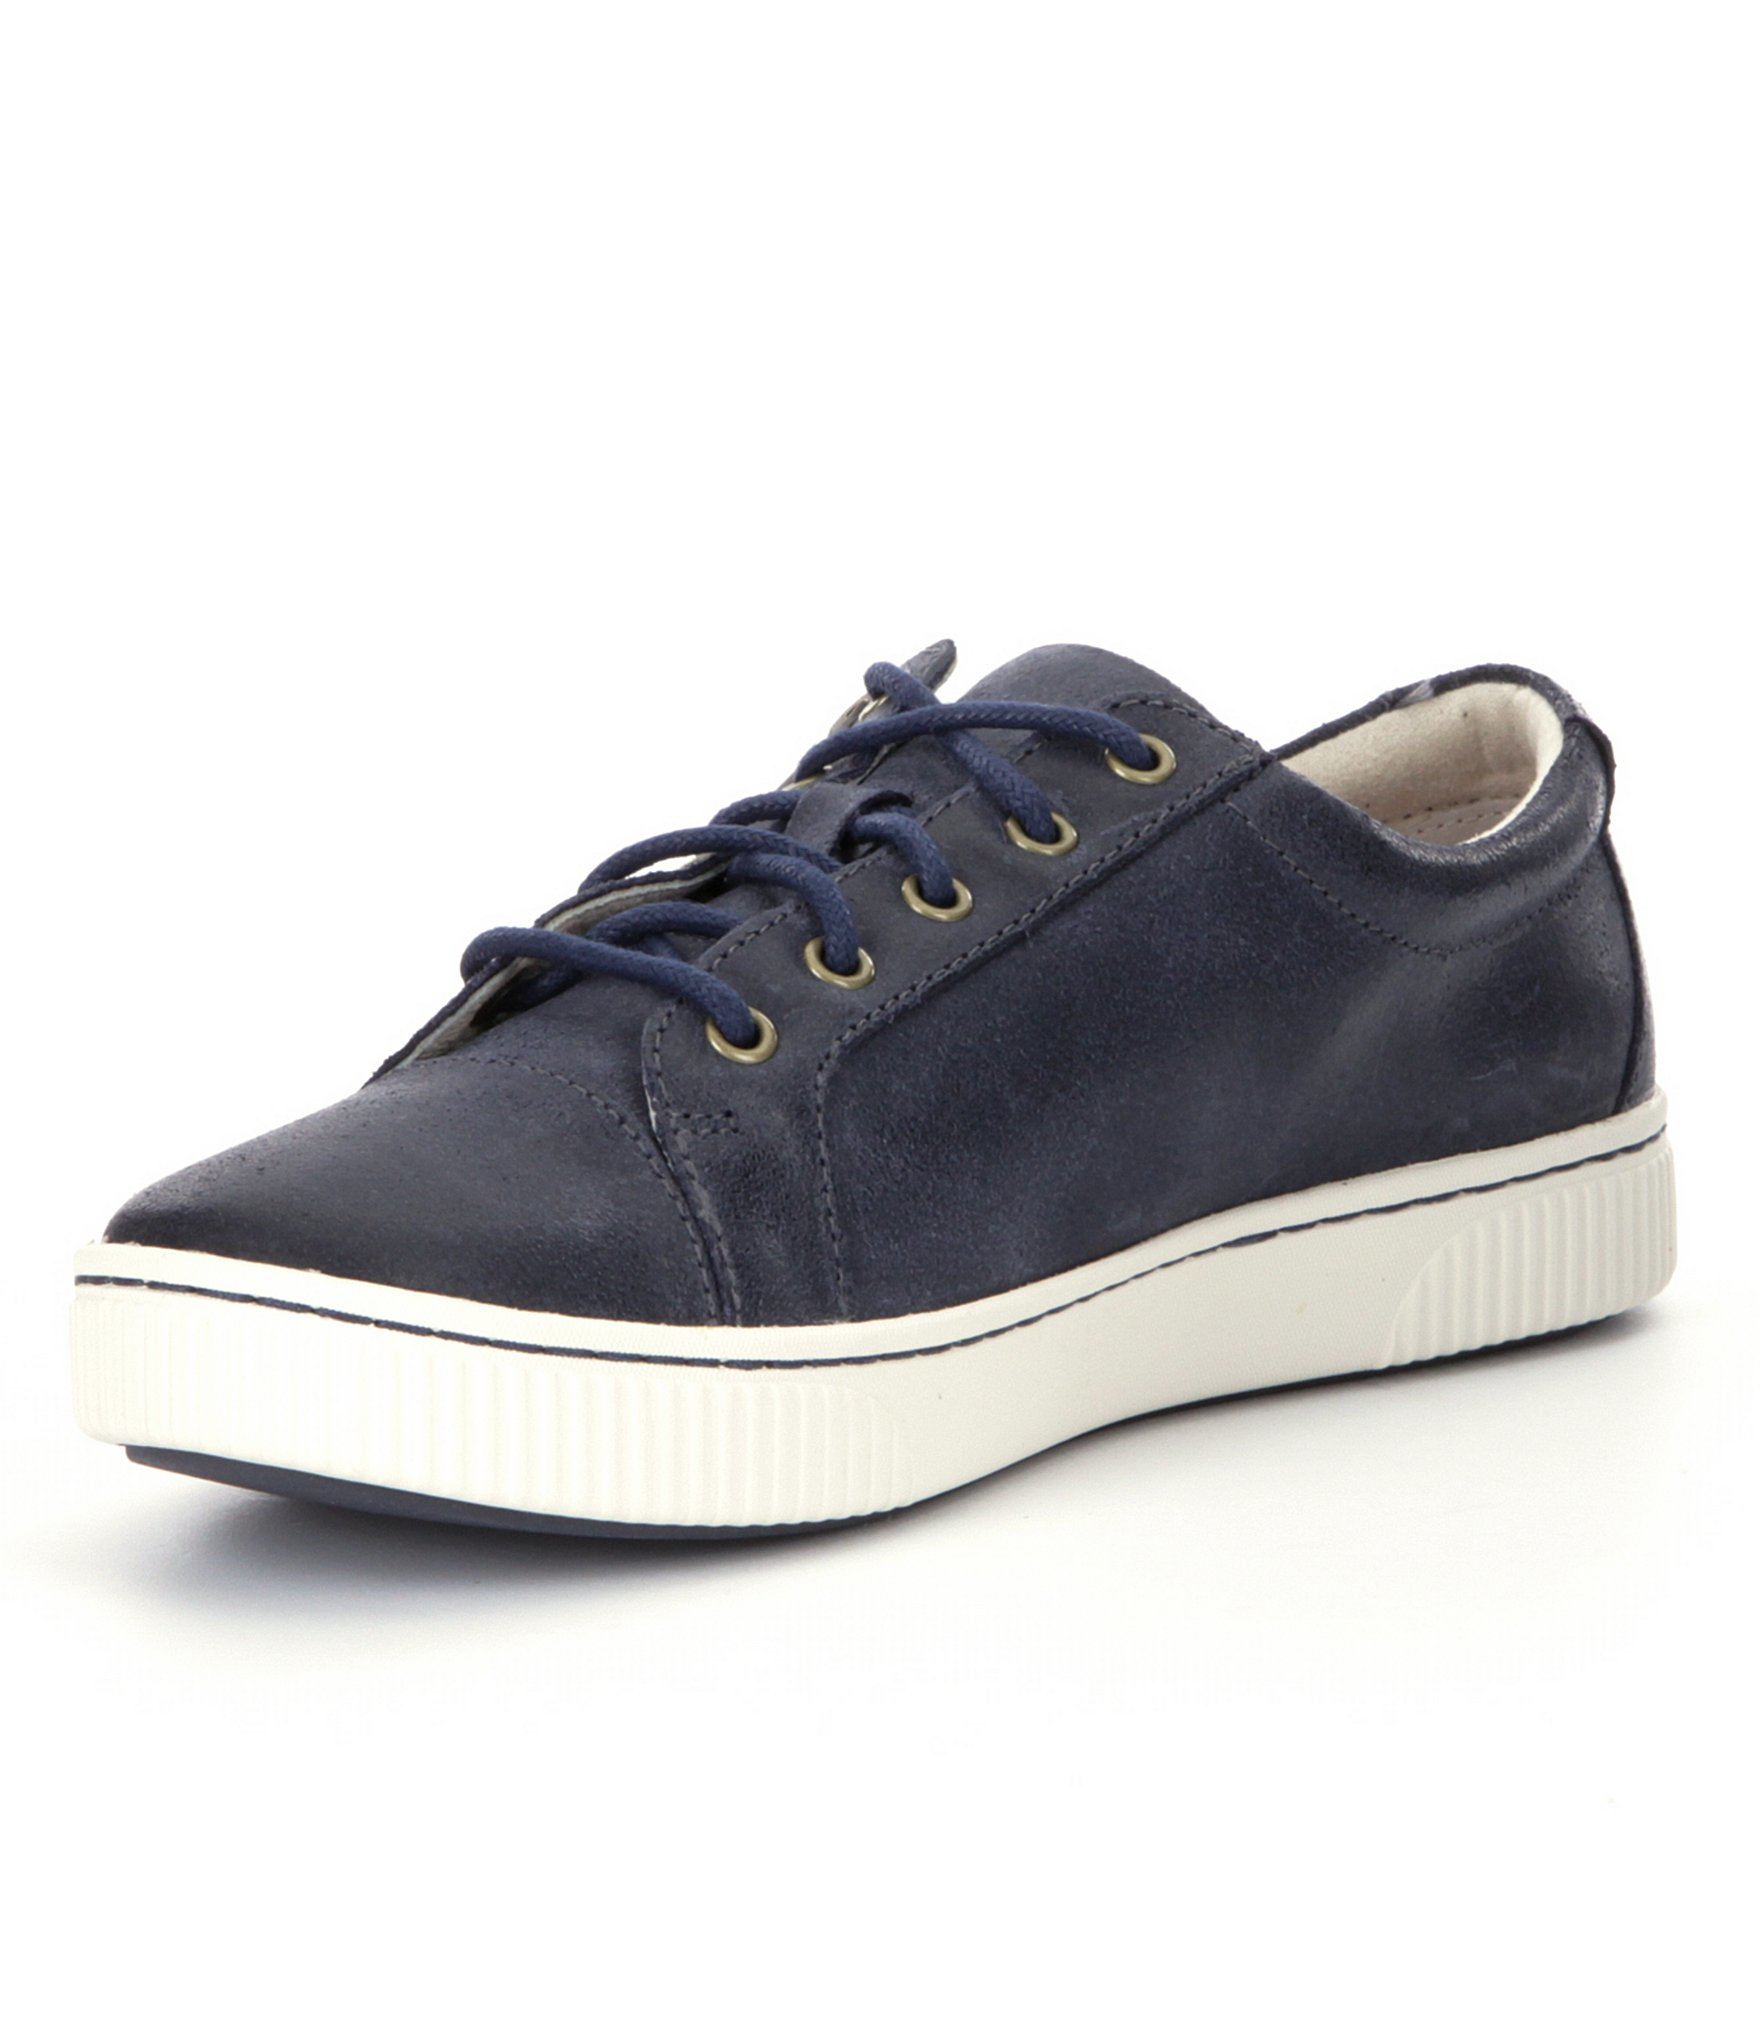 Born Leather Tamara Sneakers in Navy (Blue) - Lyst